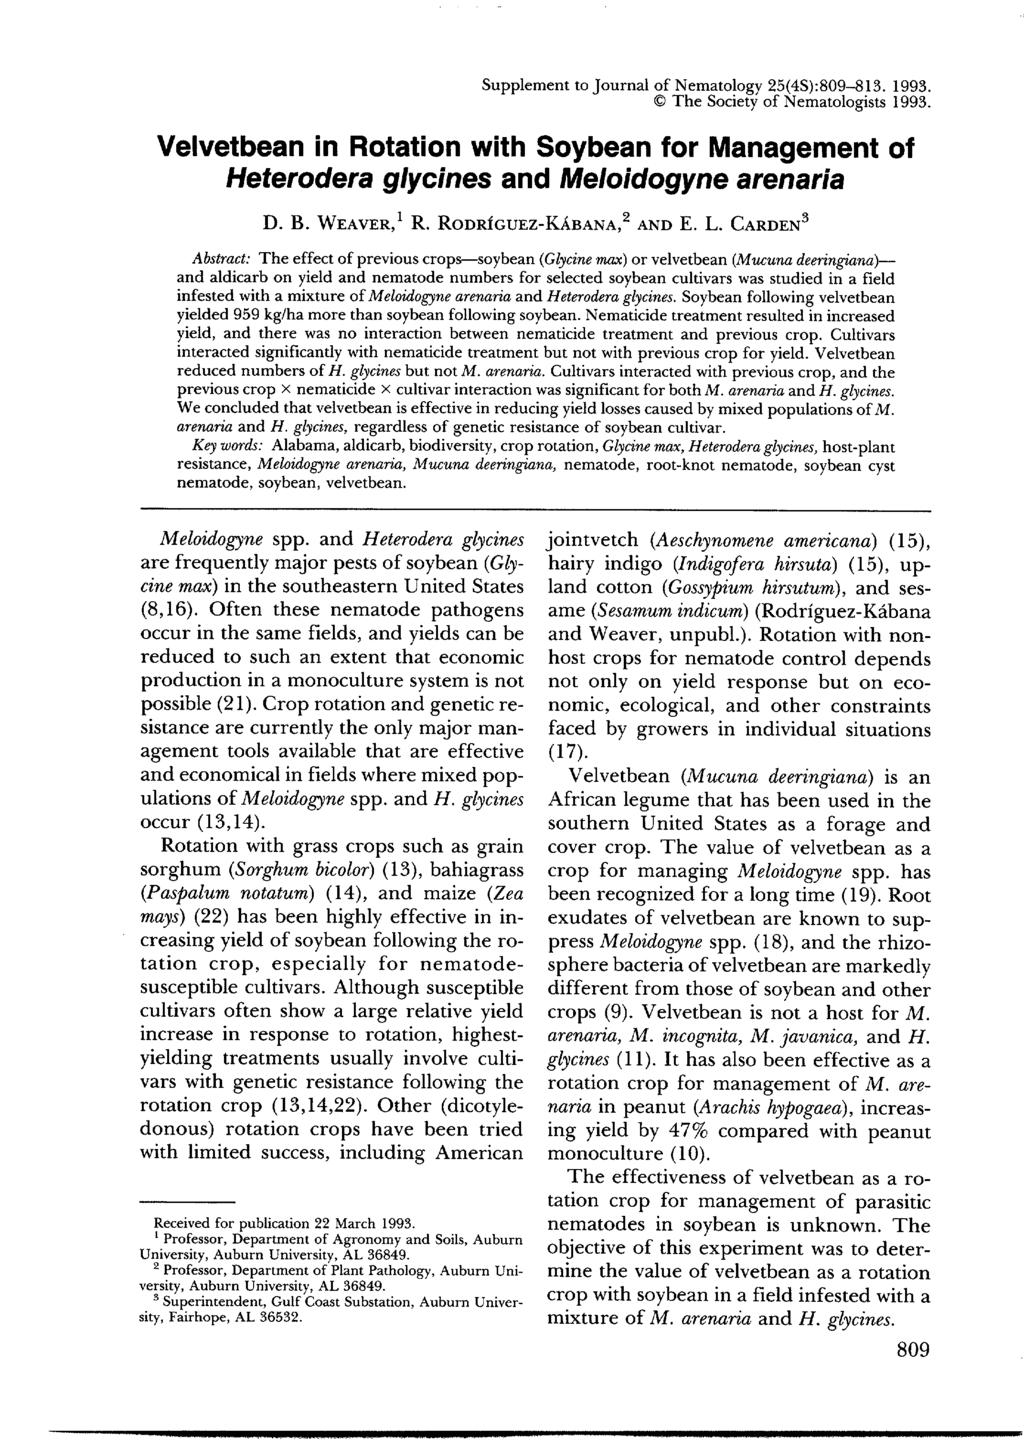 Supplement to Journal of Nematology 25(4S):809-813. 1993. The Society of Nematologists 1993. Velvetbean in Rotation with Soybean for Management of Heterodera glycines and Meloidogyne arenaria D. B.